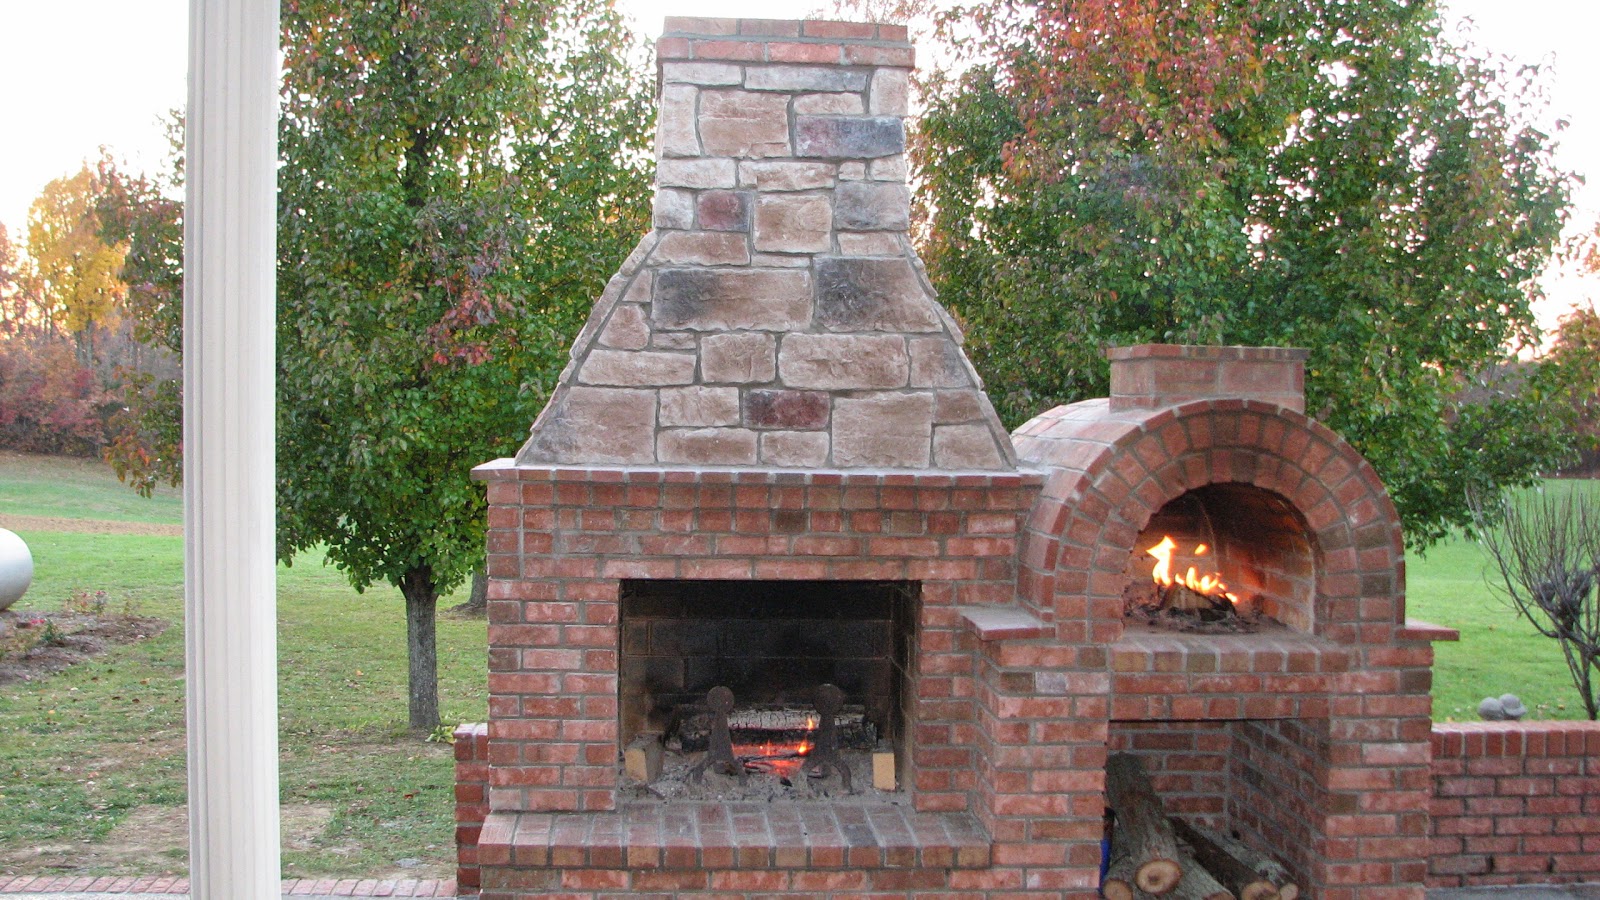 Wood Burning Brick Oven Plans Build Pizza Ovens Tutorial 2015 | Home ...